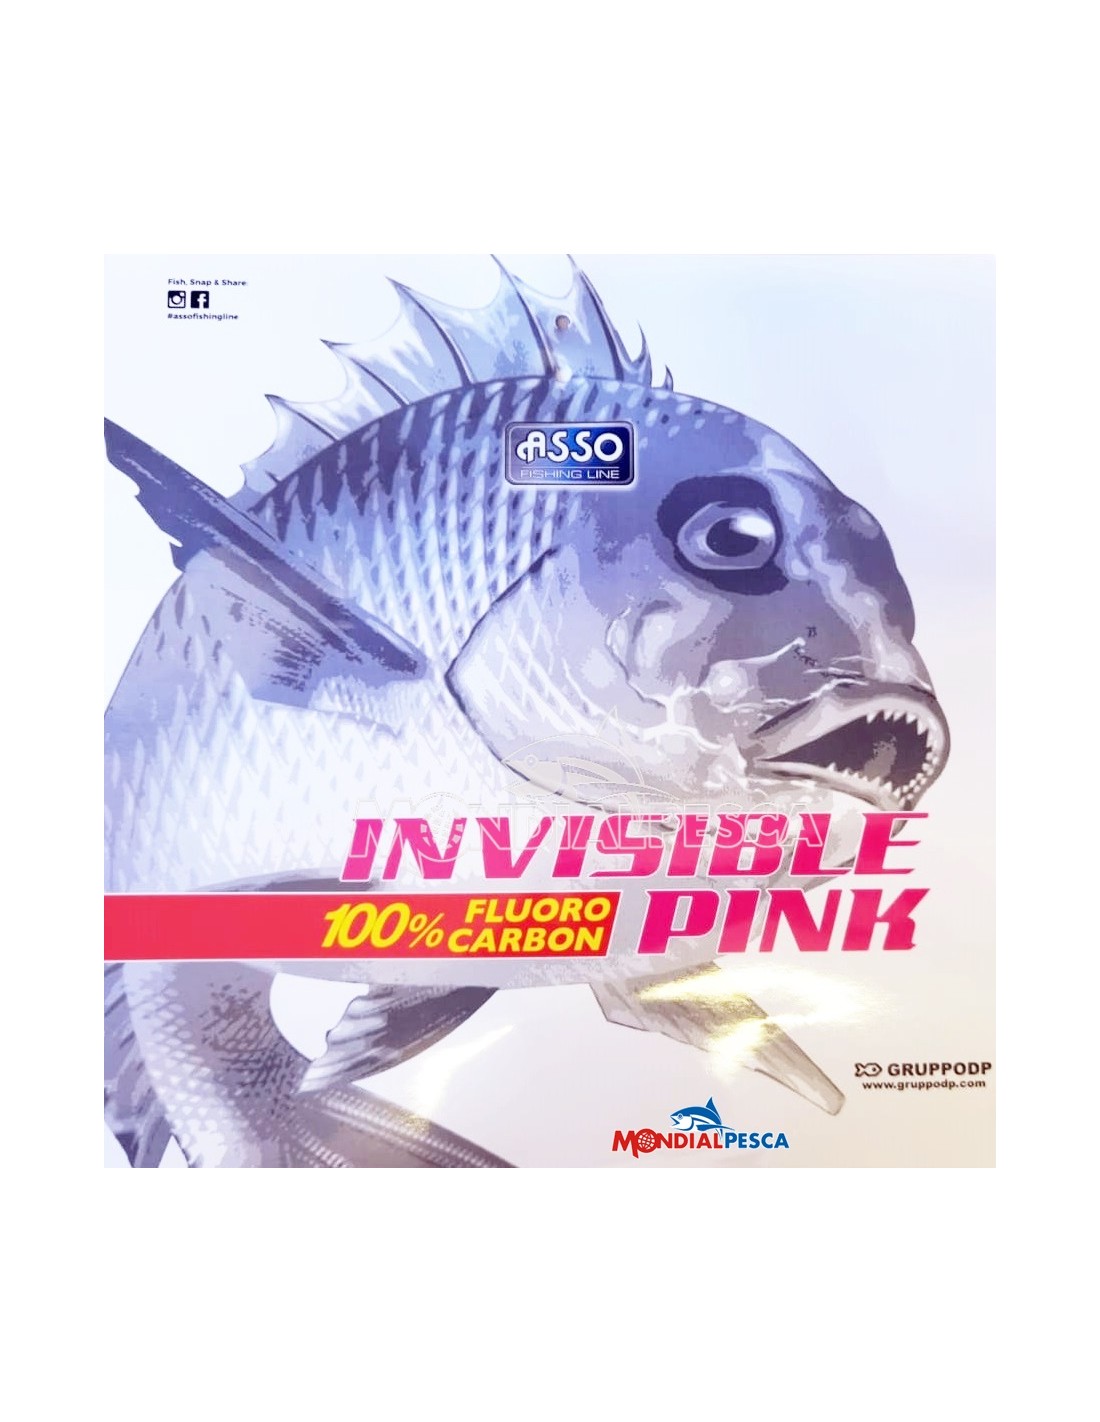 ASSO INVISIBLE PINK 100% FLUOROCARBON 50MT sconto 30%